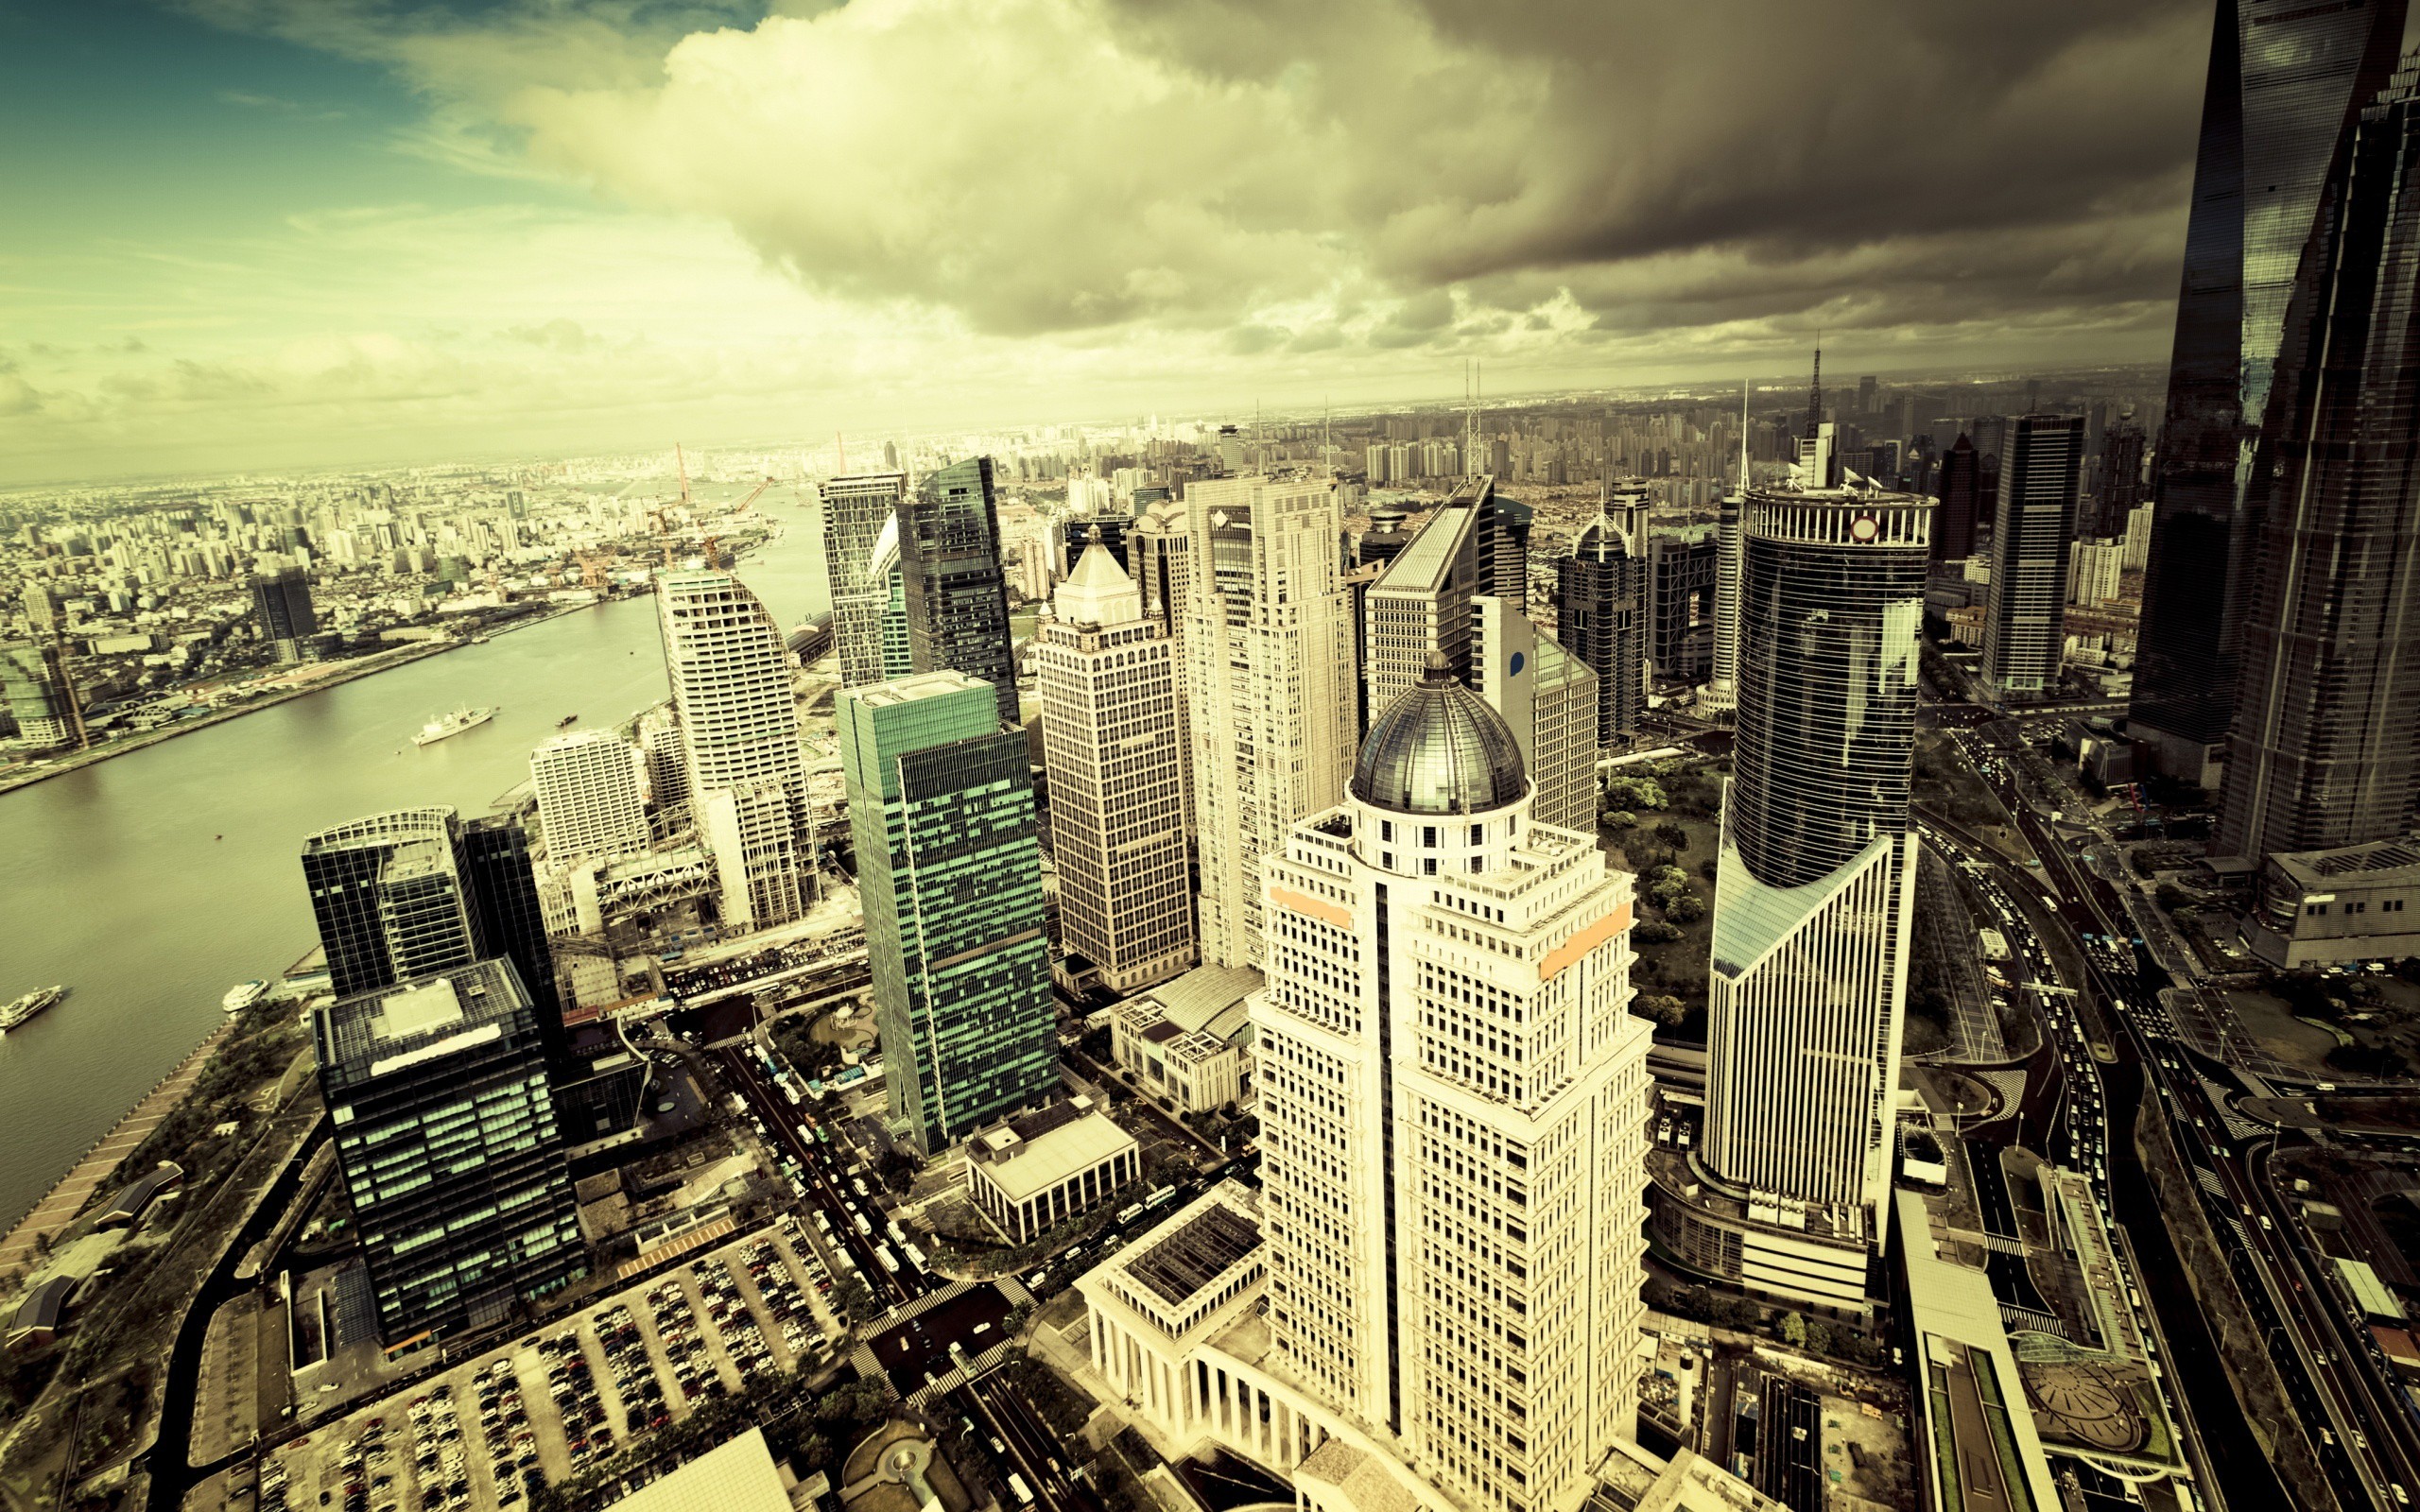 General 2560x1600 Shanghai China cityscape building clouds river Asia aerial view